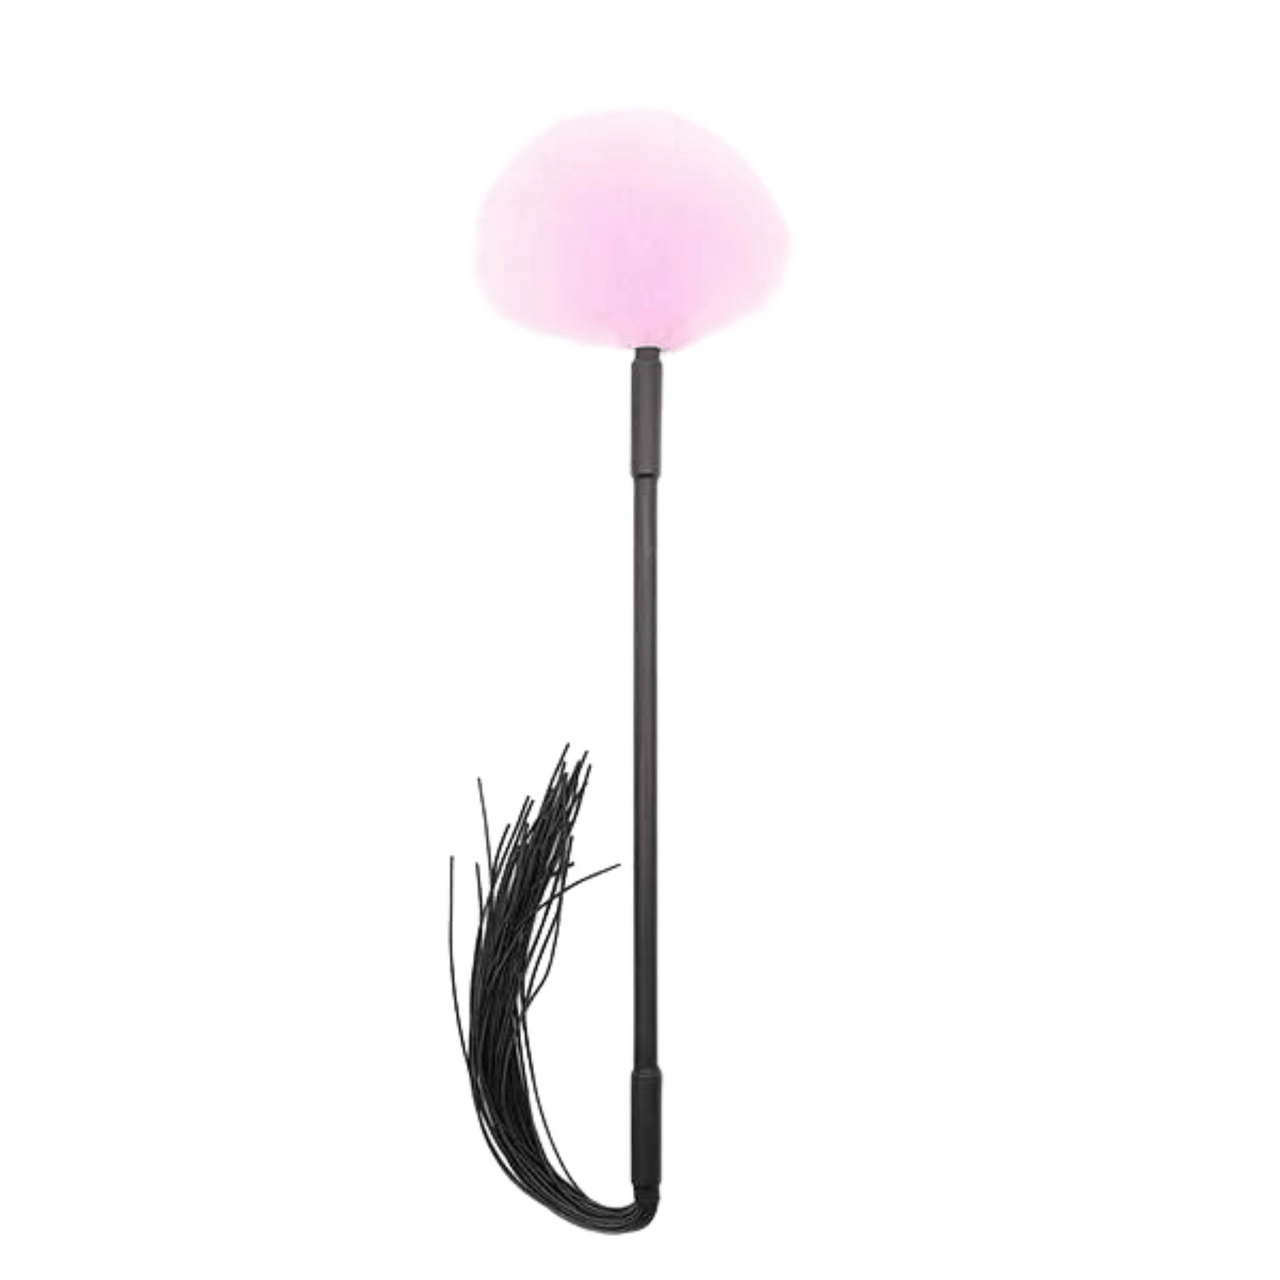 Enchanting Dual Sensation Play Wand Pink Feathers & Black Rubber Tassels for Sensory Pleasures